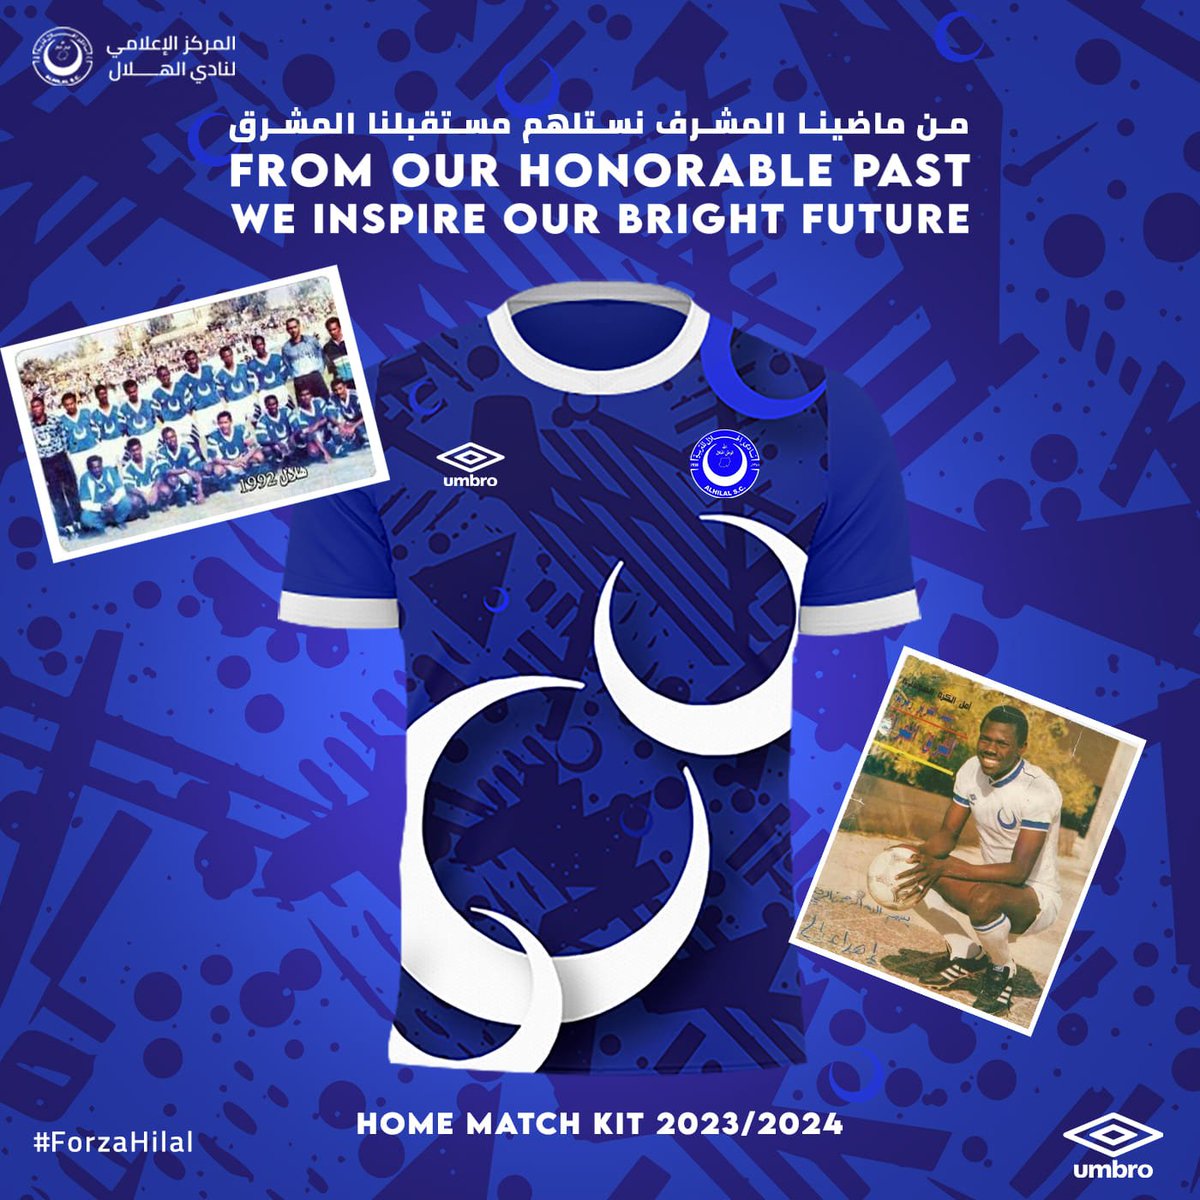 🇸🇩 Al Hilal reveal their CAF Champions League Kit for the 2023/24 season